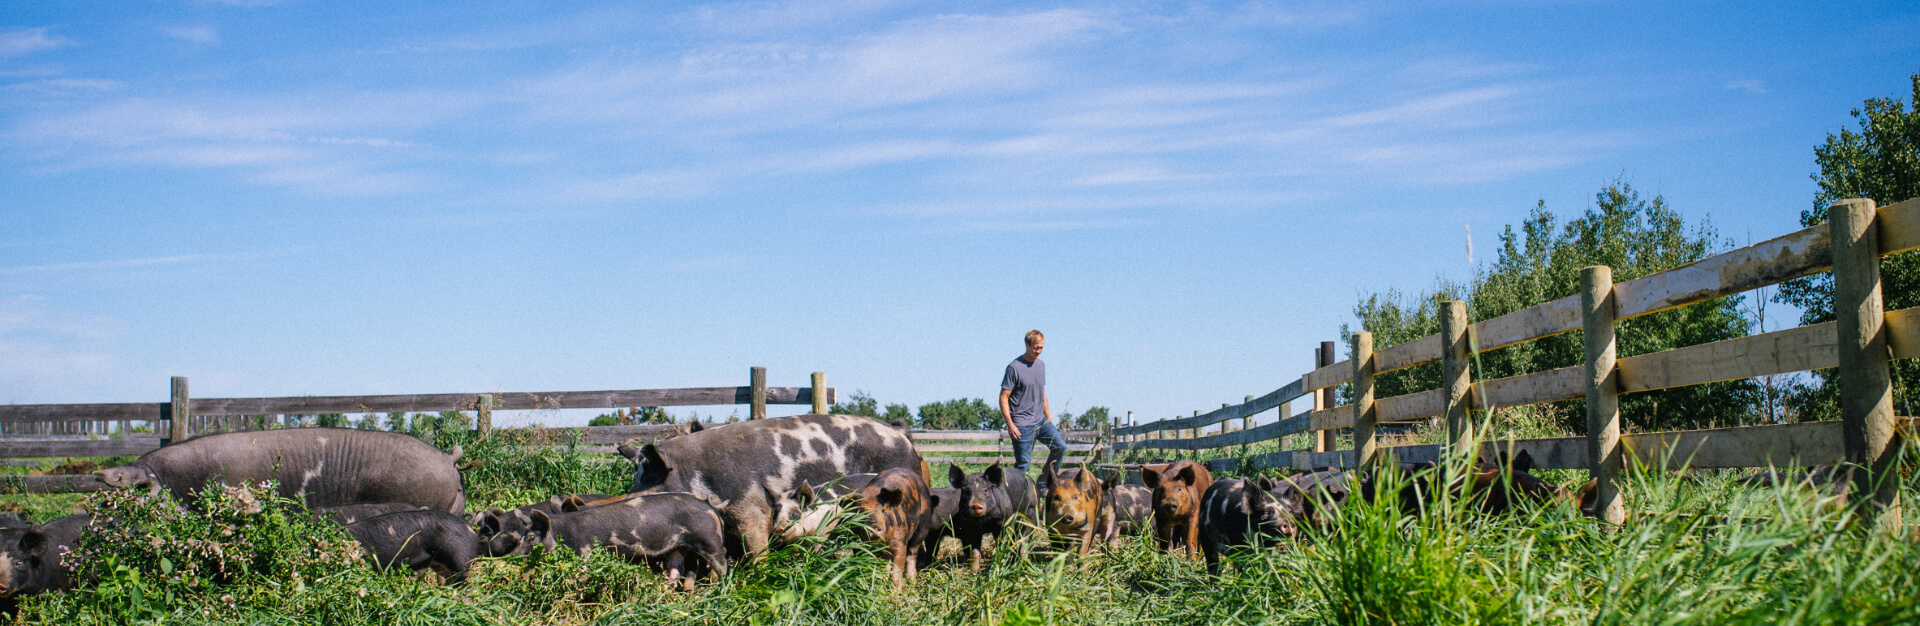 Image of pigs in fenced grassy area, with farmer walking behind them.